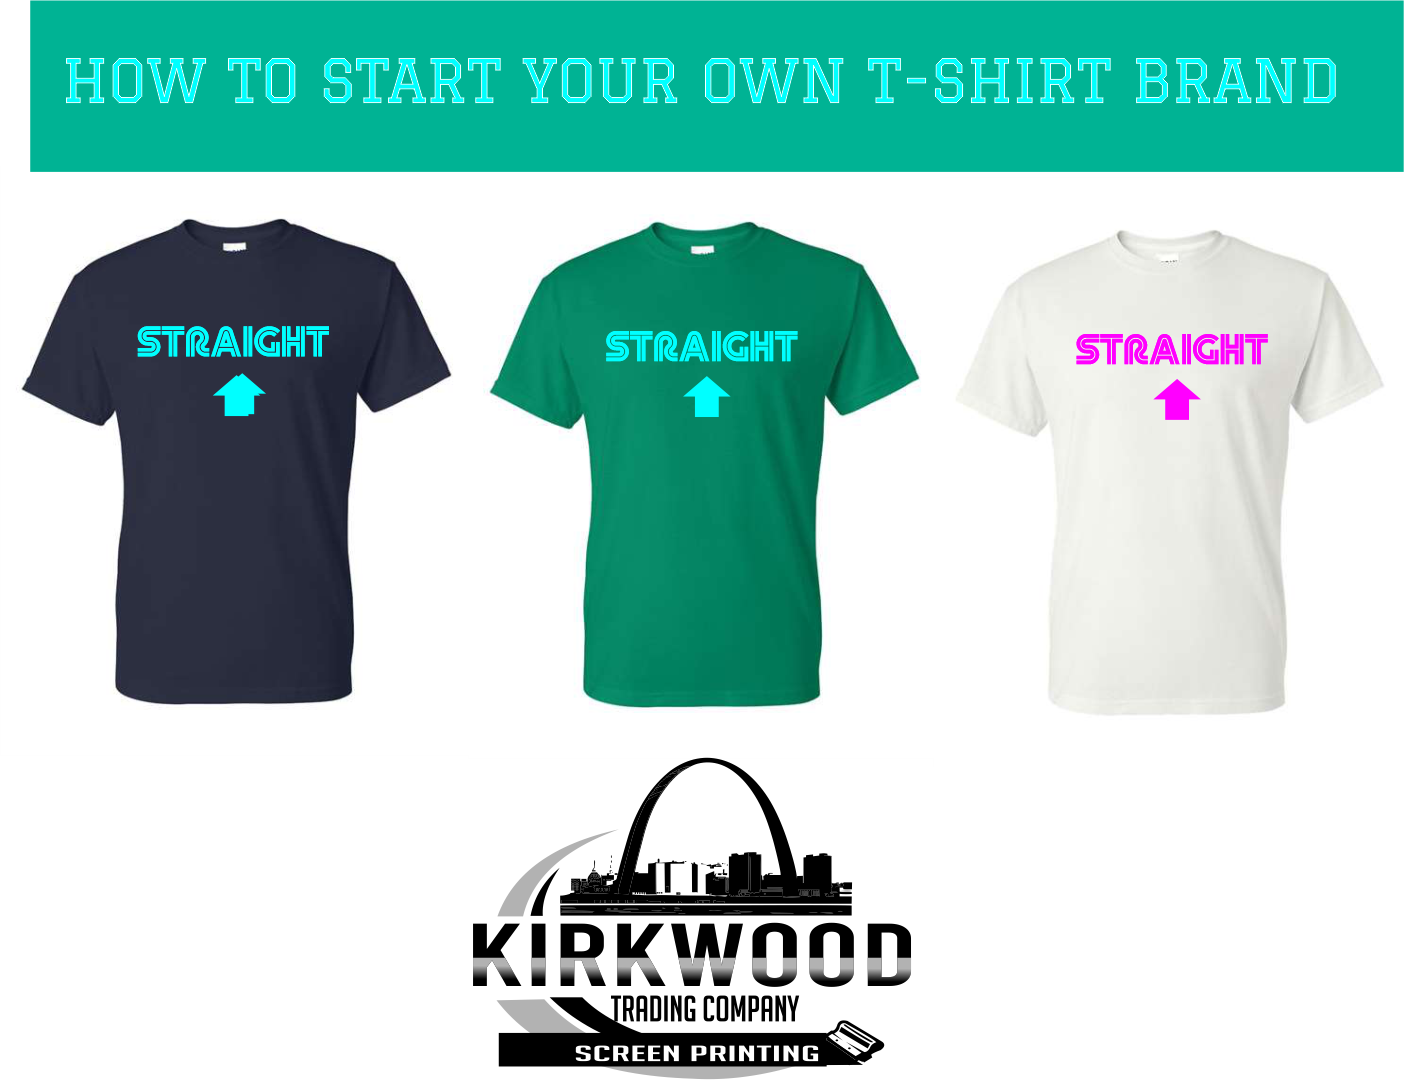 Starting a T-Shirt Printing Business? Here's What You Need to Know